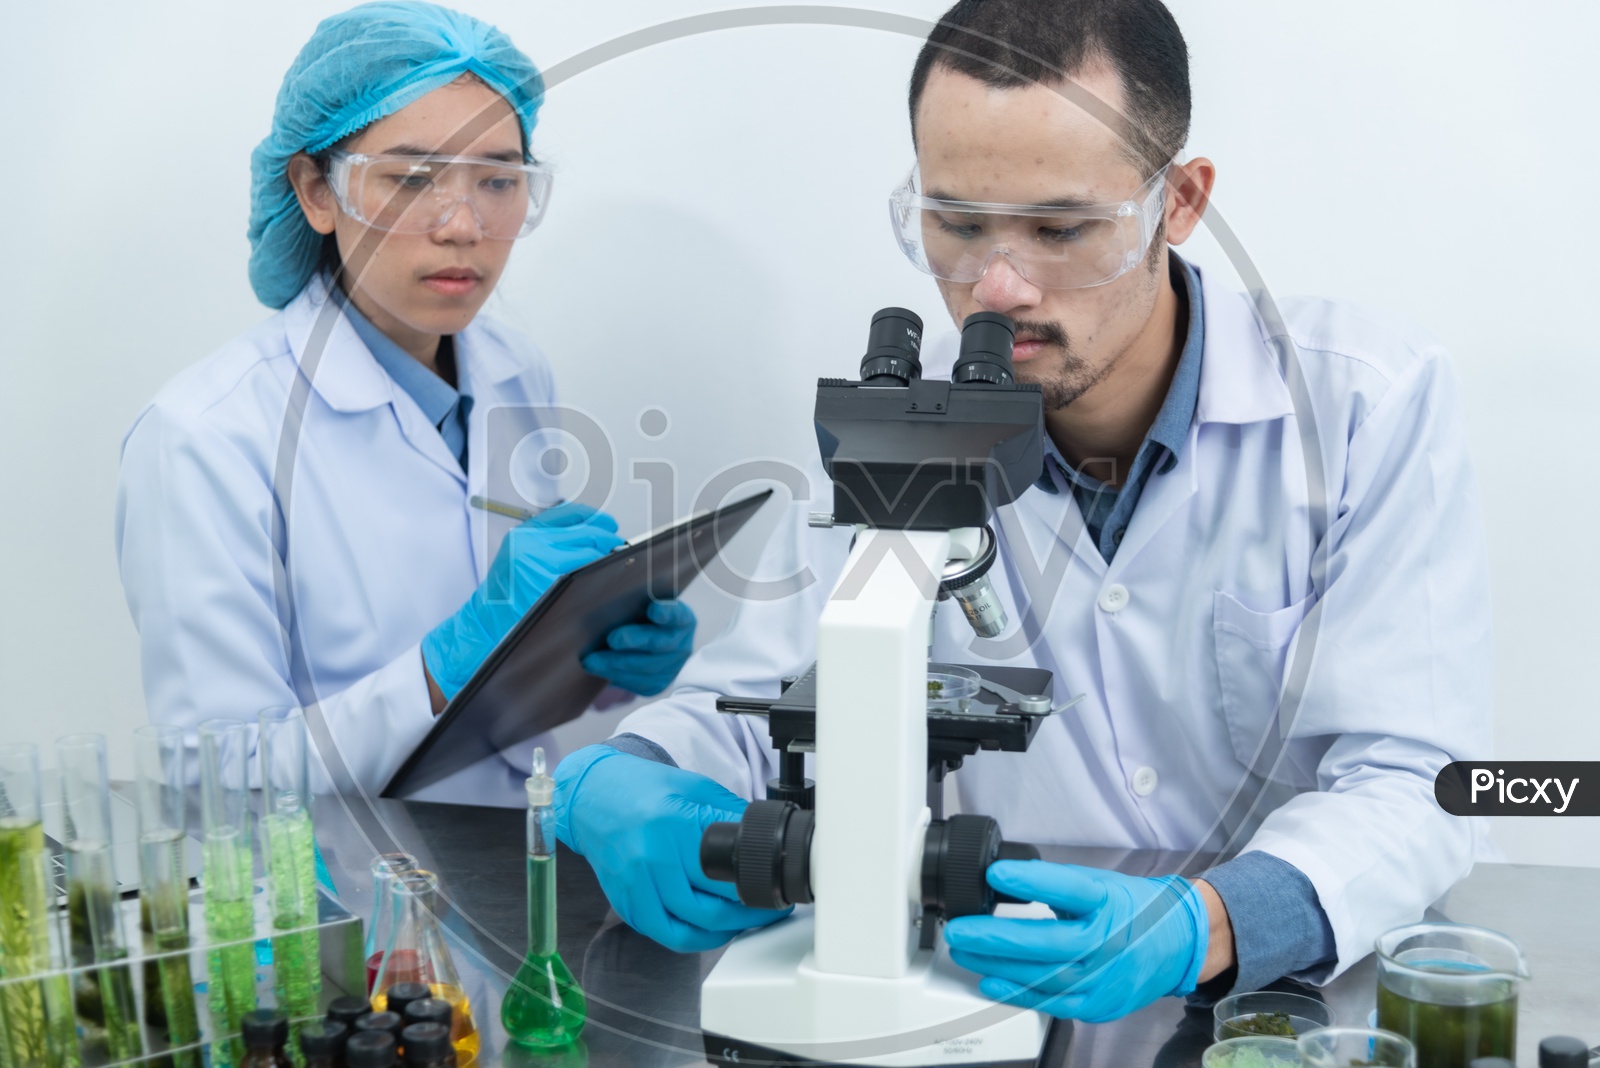 Asian Scientists using the Microscope for Researching Natural Extracts in Modern Laboratory